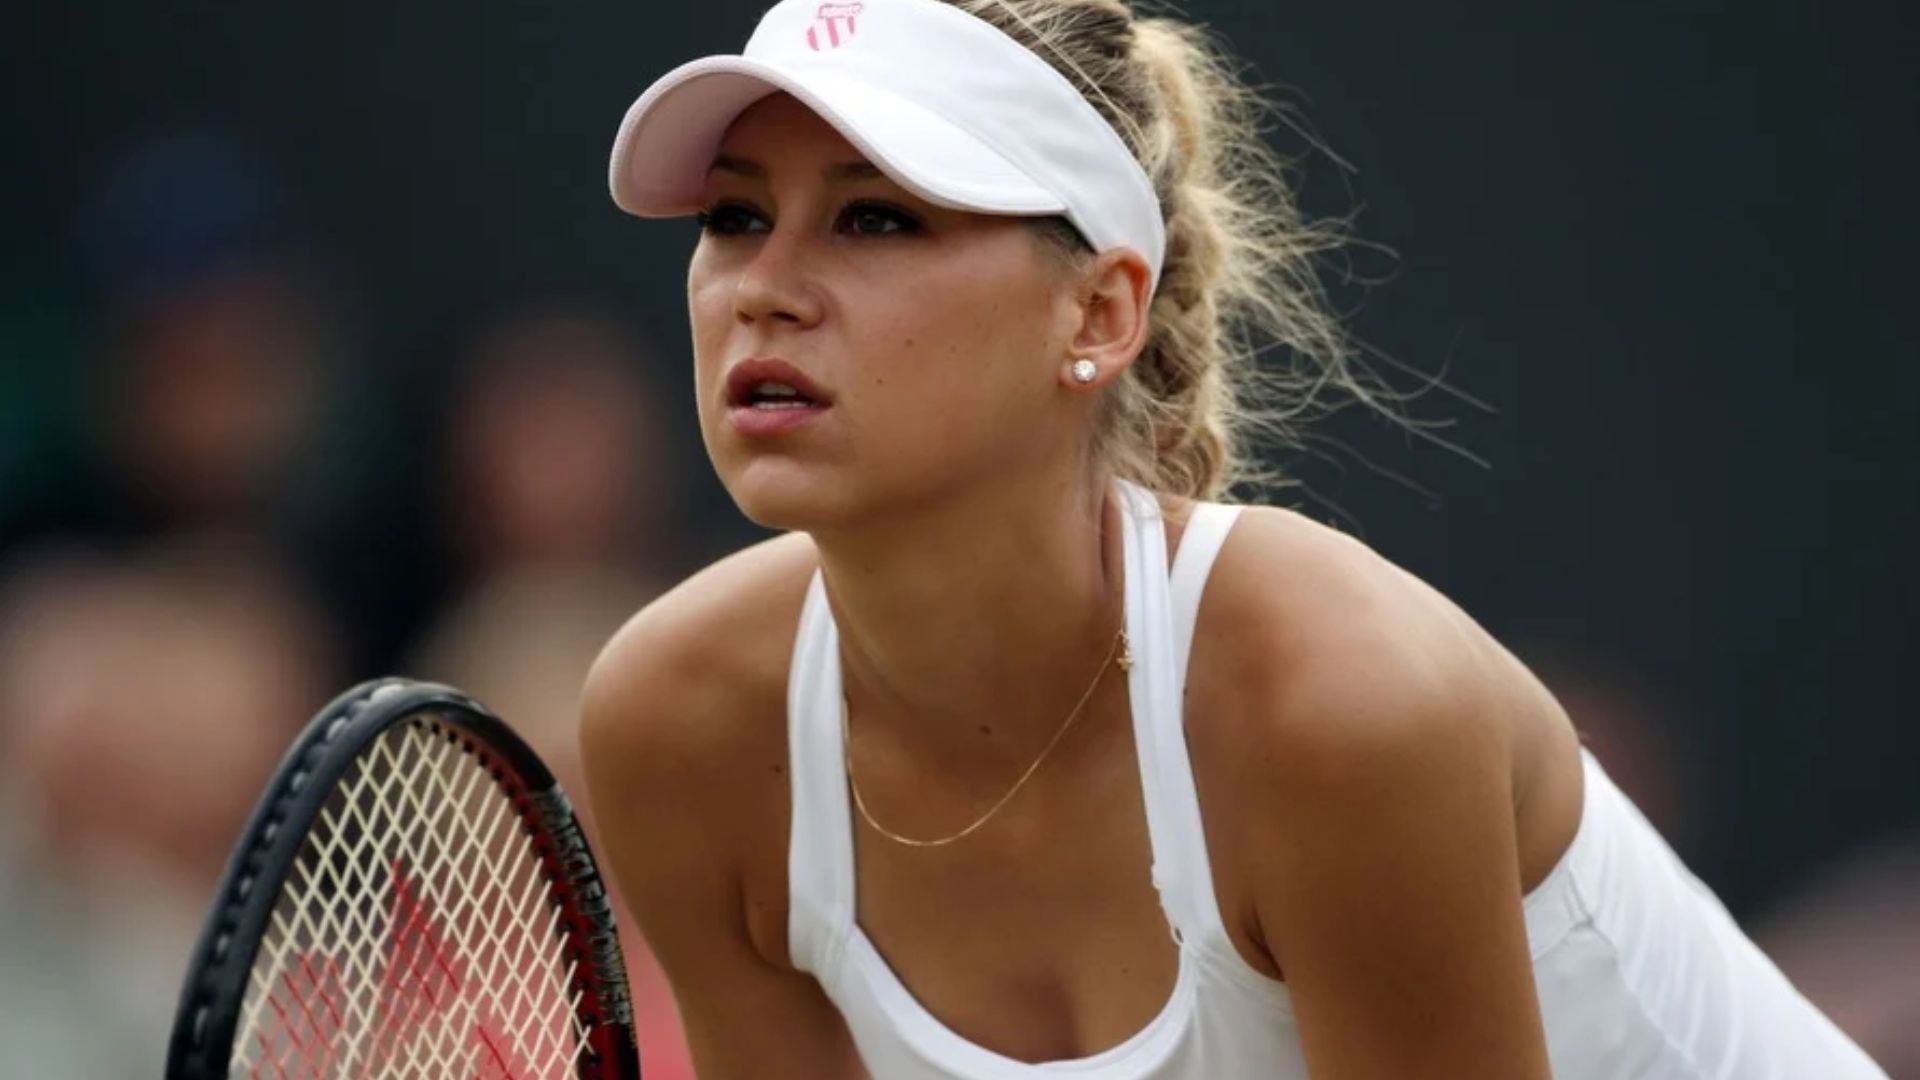 Anna Kournikova Net Worth - A Russian Former Professional Tennis Player And American Television Personality